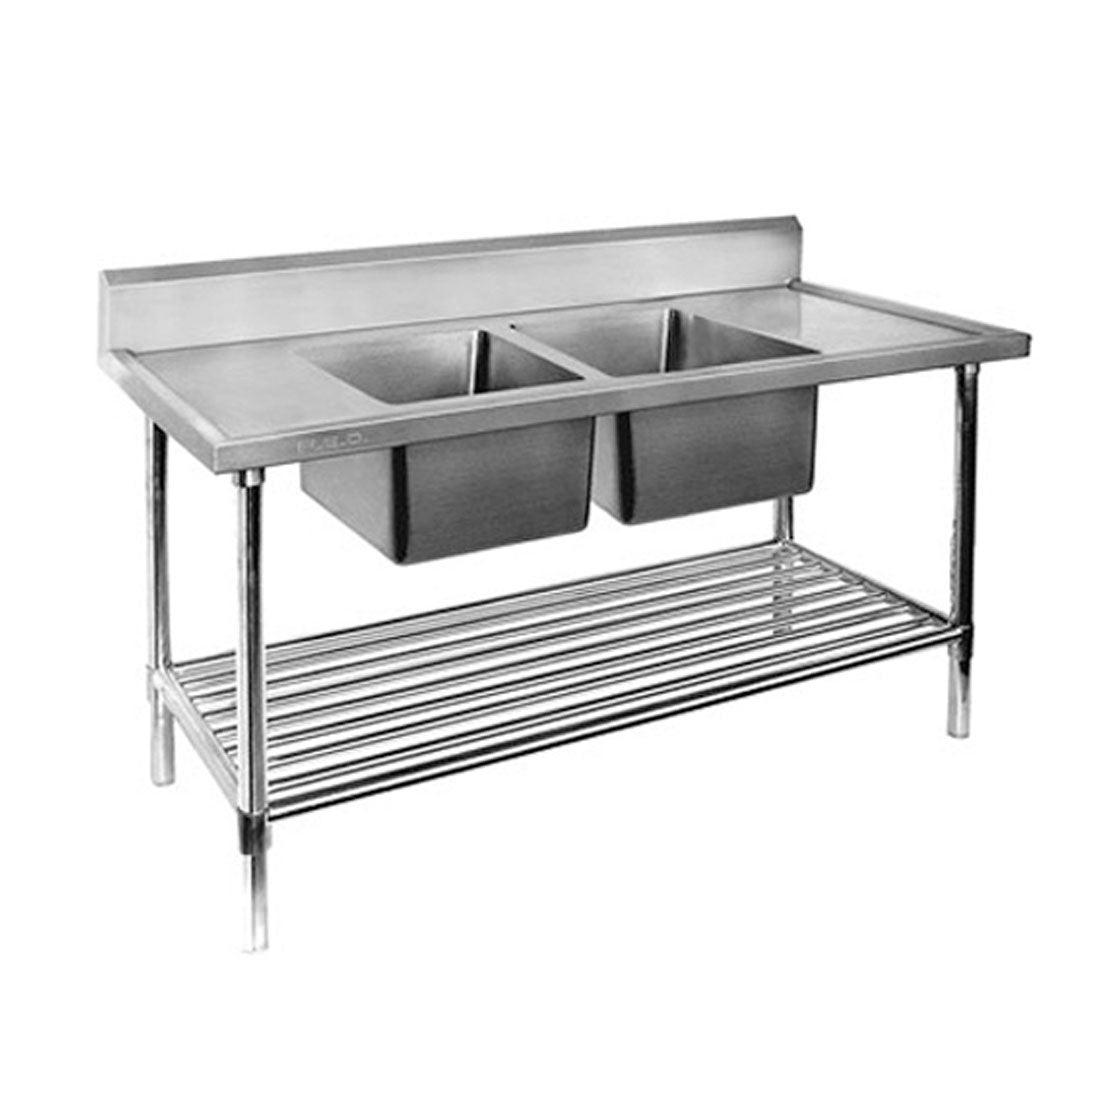 Modular Systems Double Centre Sink Bench with Pot Undershelf 1200x600x900 DSB6-1200C/A